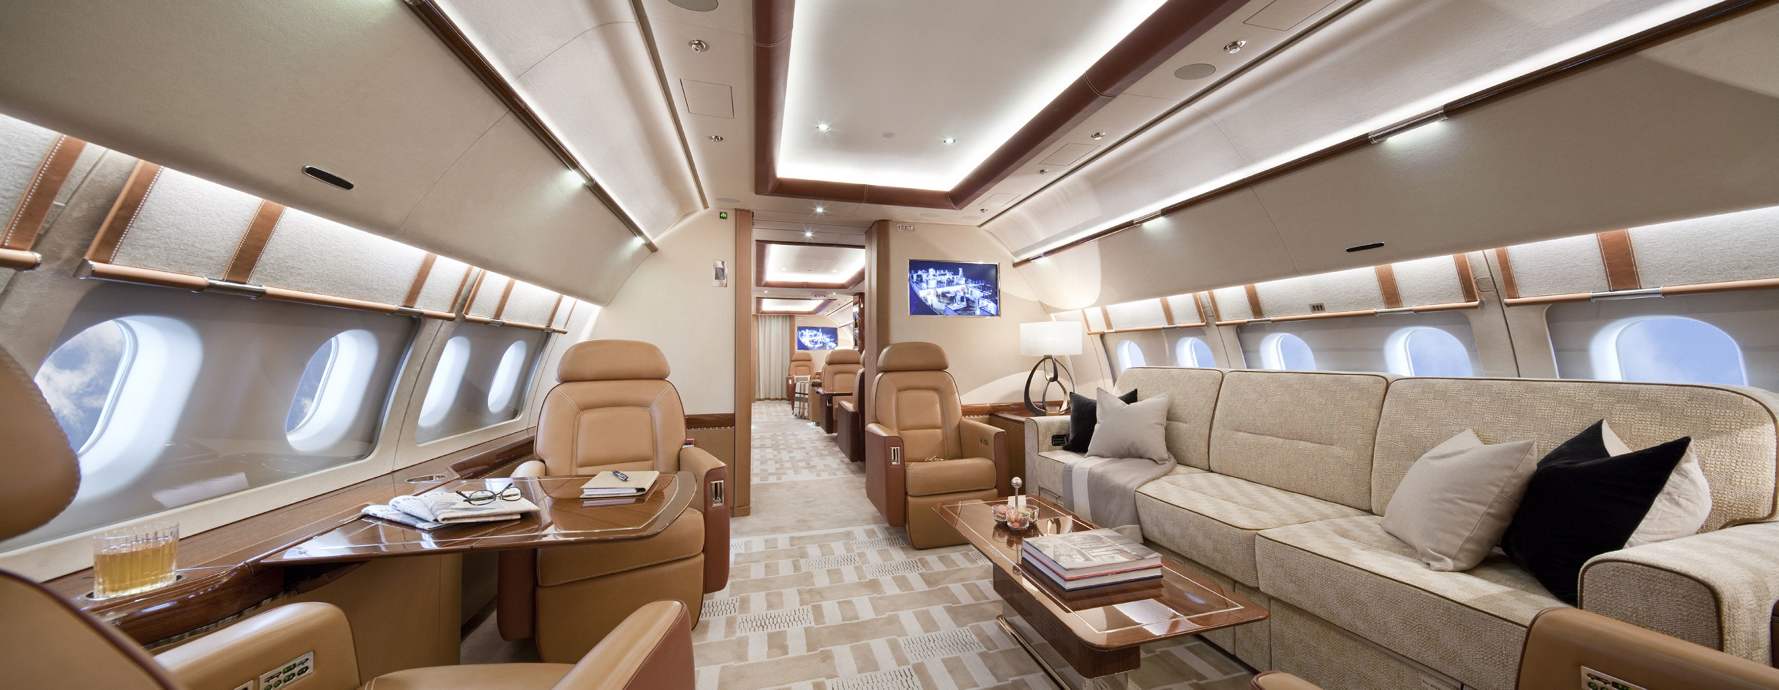 Airbus targets Middle East bizjet market with ACJ